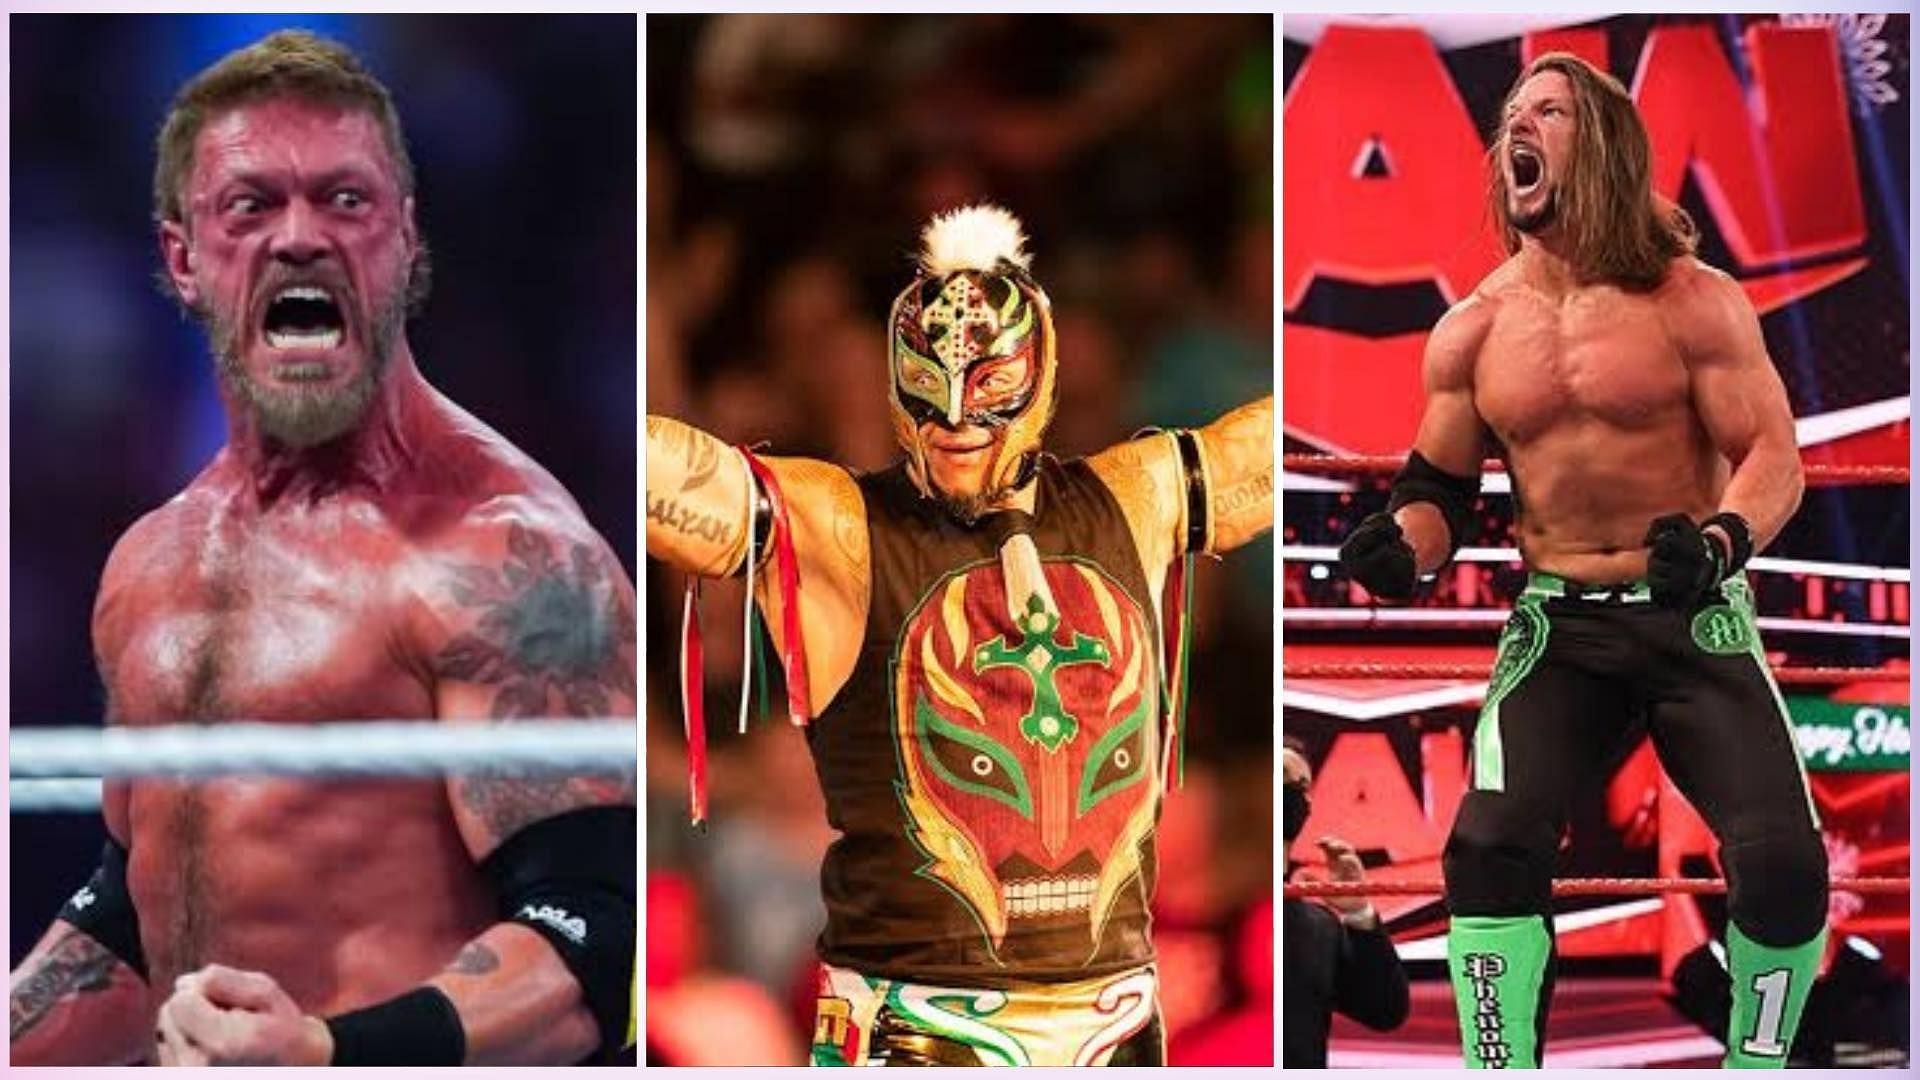 Edge, Rey Mysterio, and AJ Styles will clash on WWE SmackDown